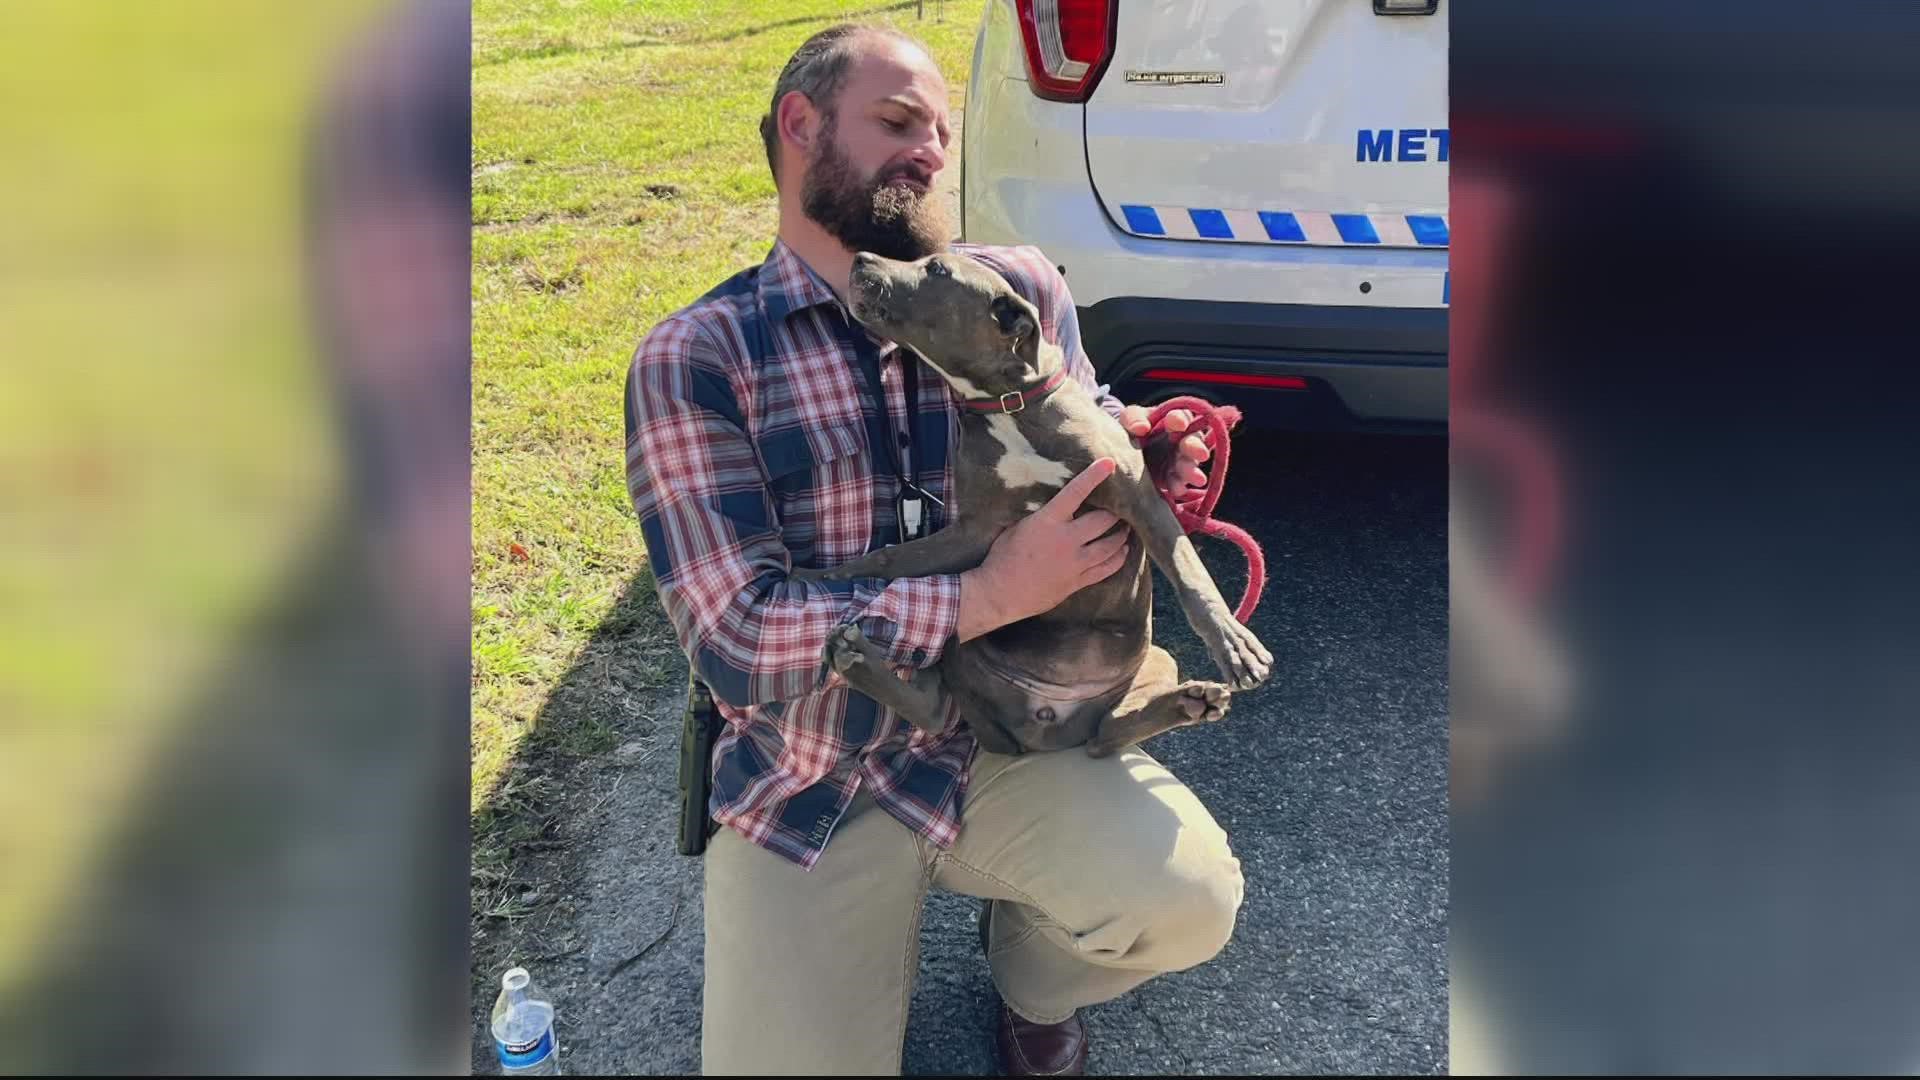 A man was happily reunited with his 5-month-old pup after they were allegedly shot at last Wednesday in Northeast D.C.